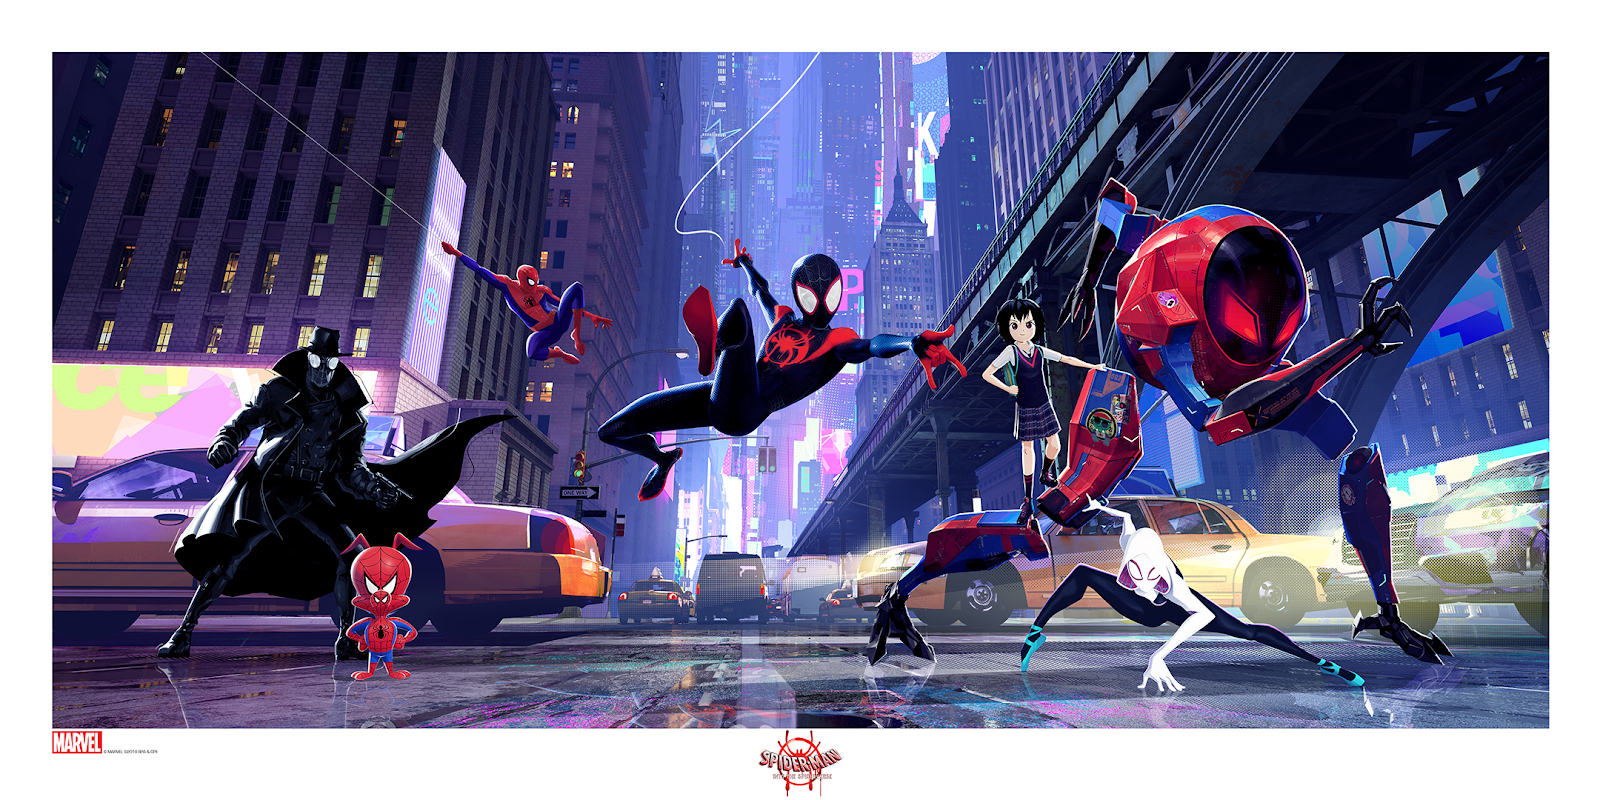 INSIDE THE ROCK POSTER FRAME BLOG: Spider-Man Into The Spider-Verse